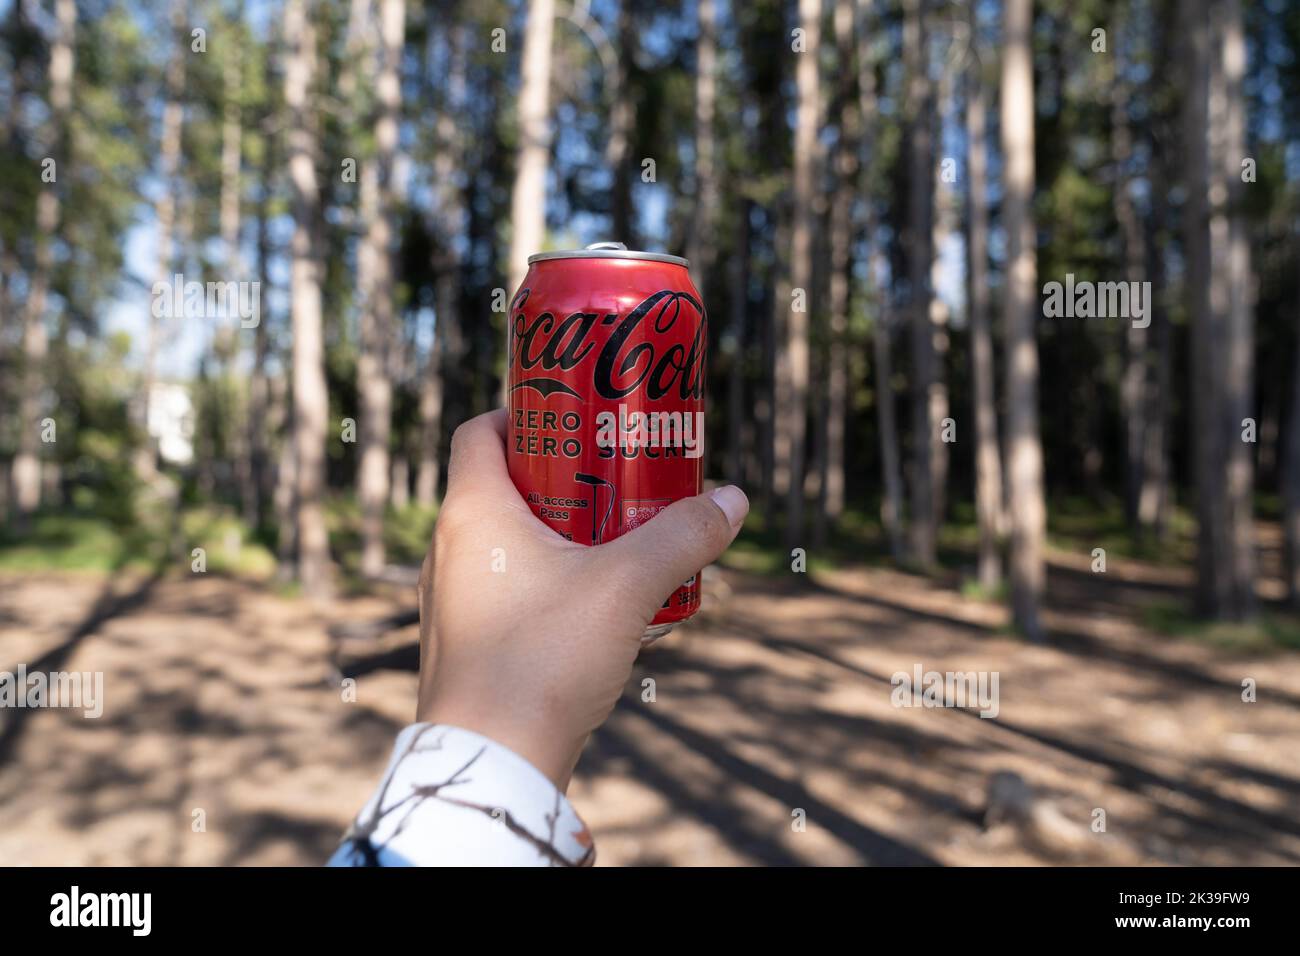 Wyoming, USA - July 19, 2022: Hand holds up a Coca-Cola Zero Sugar can of soda pop, while in the forest Stock Photo